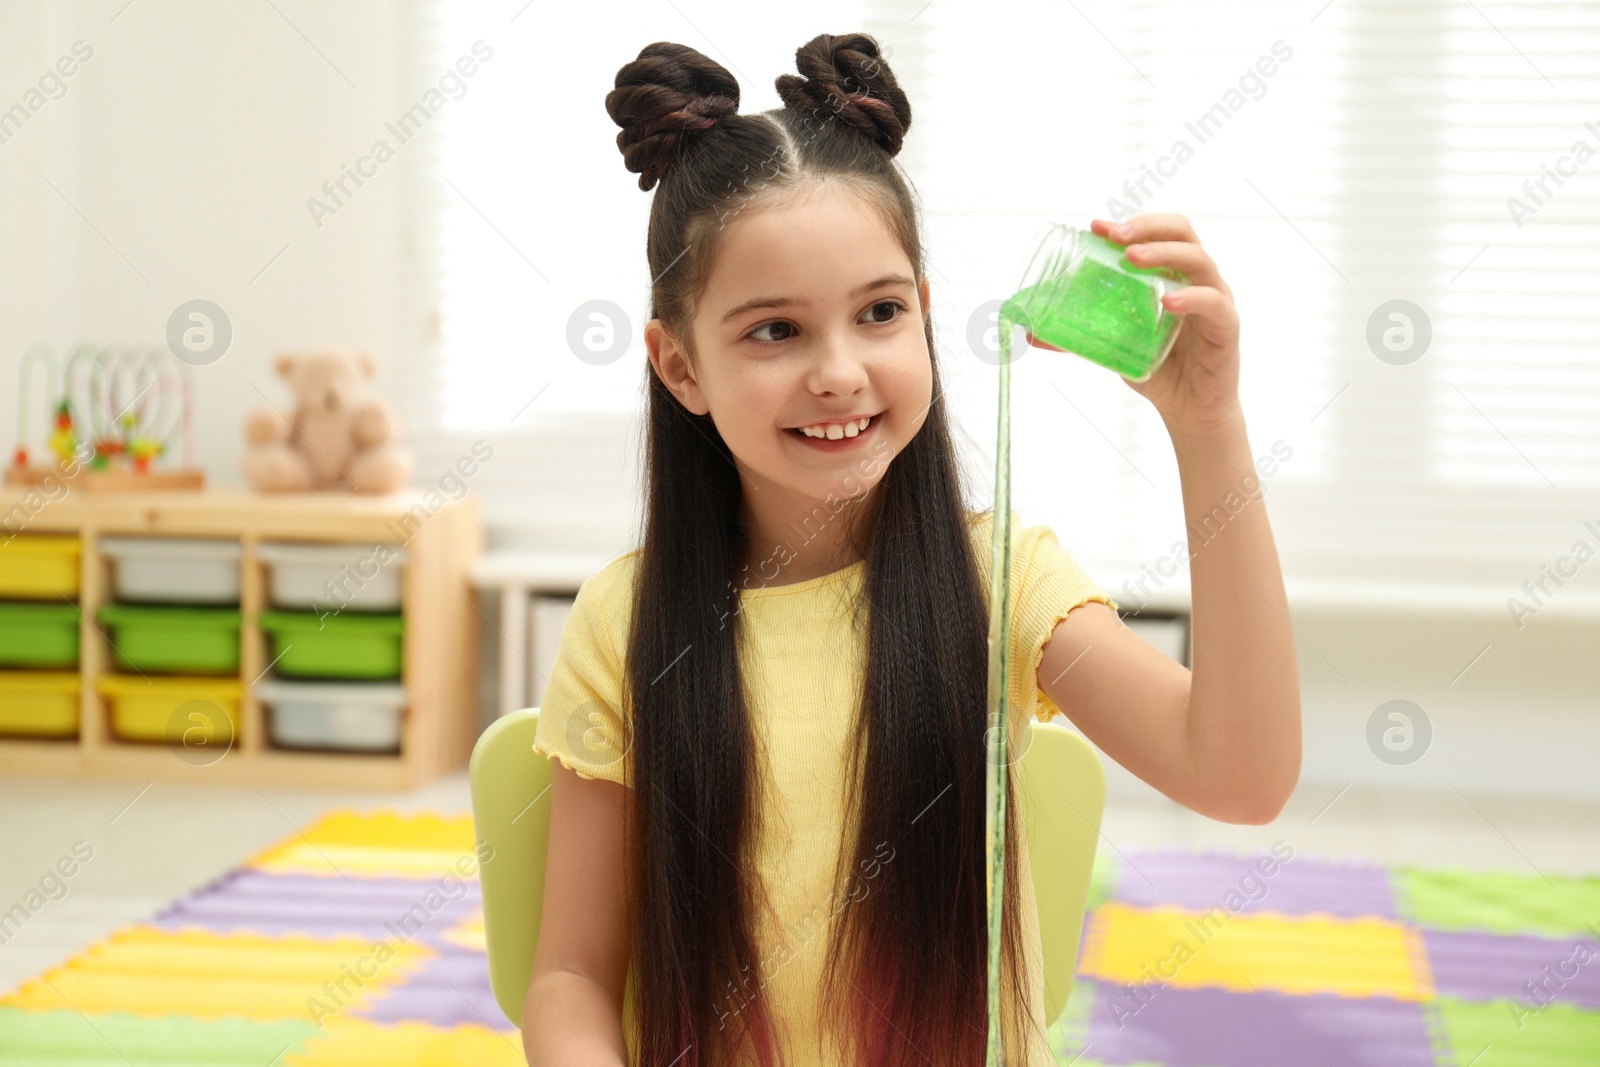 Photo of Little girl pouring slime from jar in room